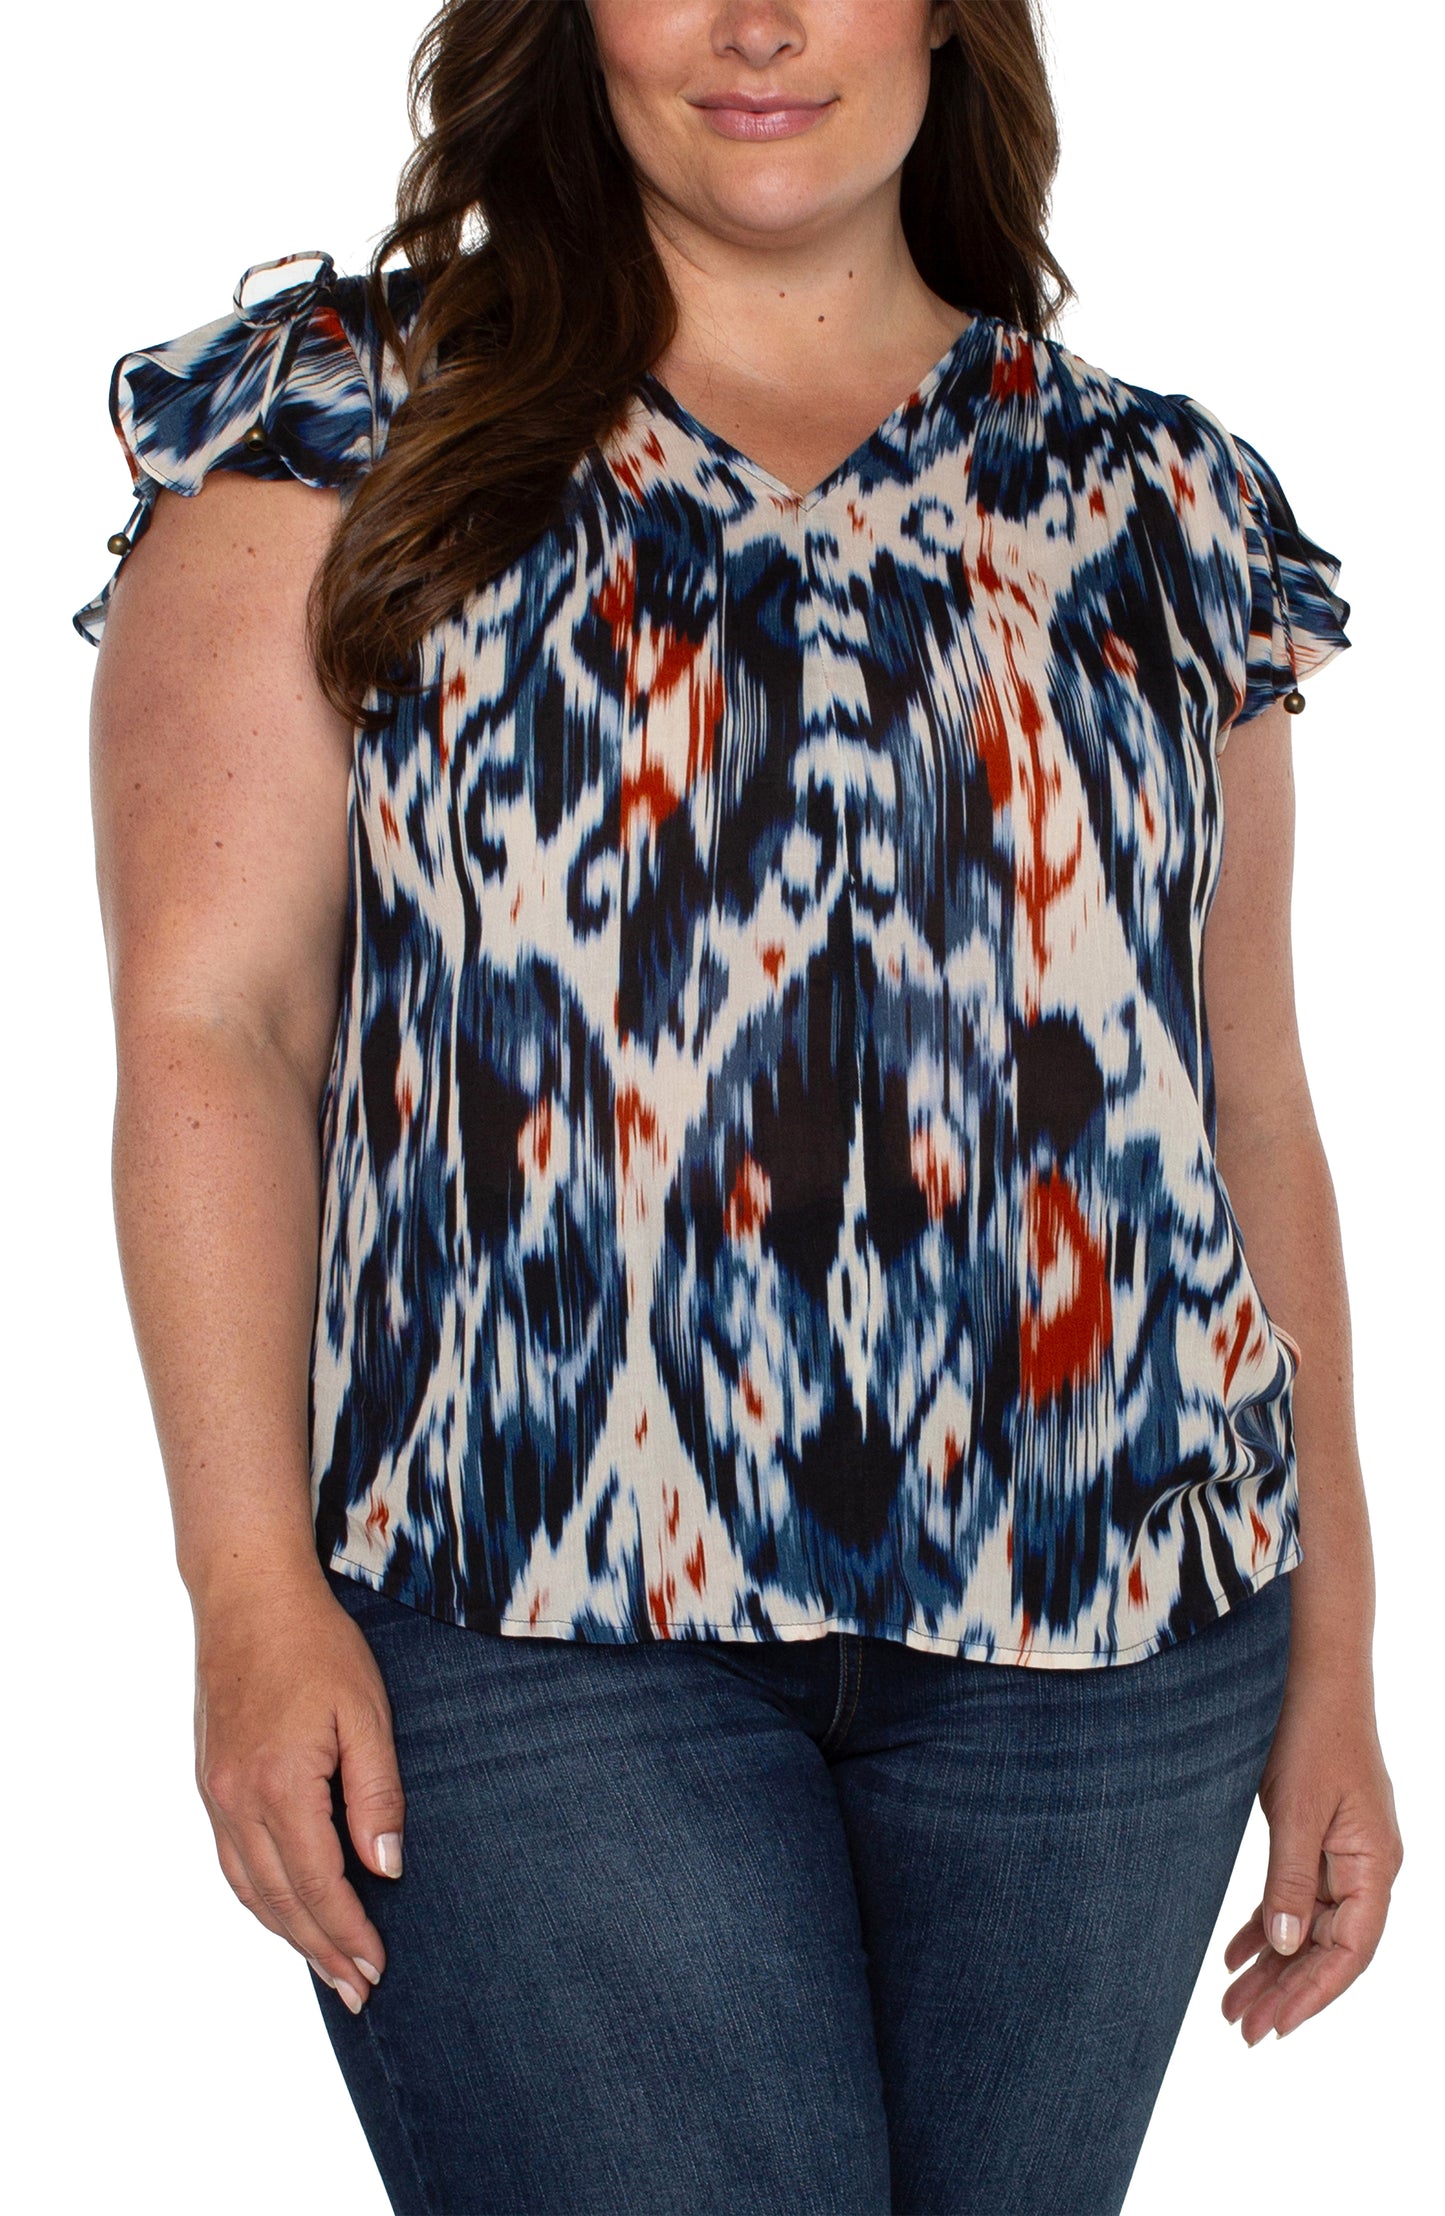 Liverpool's Shirred V-Neck Dolman Top with Tie Details (Allover Ikat)